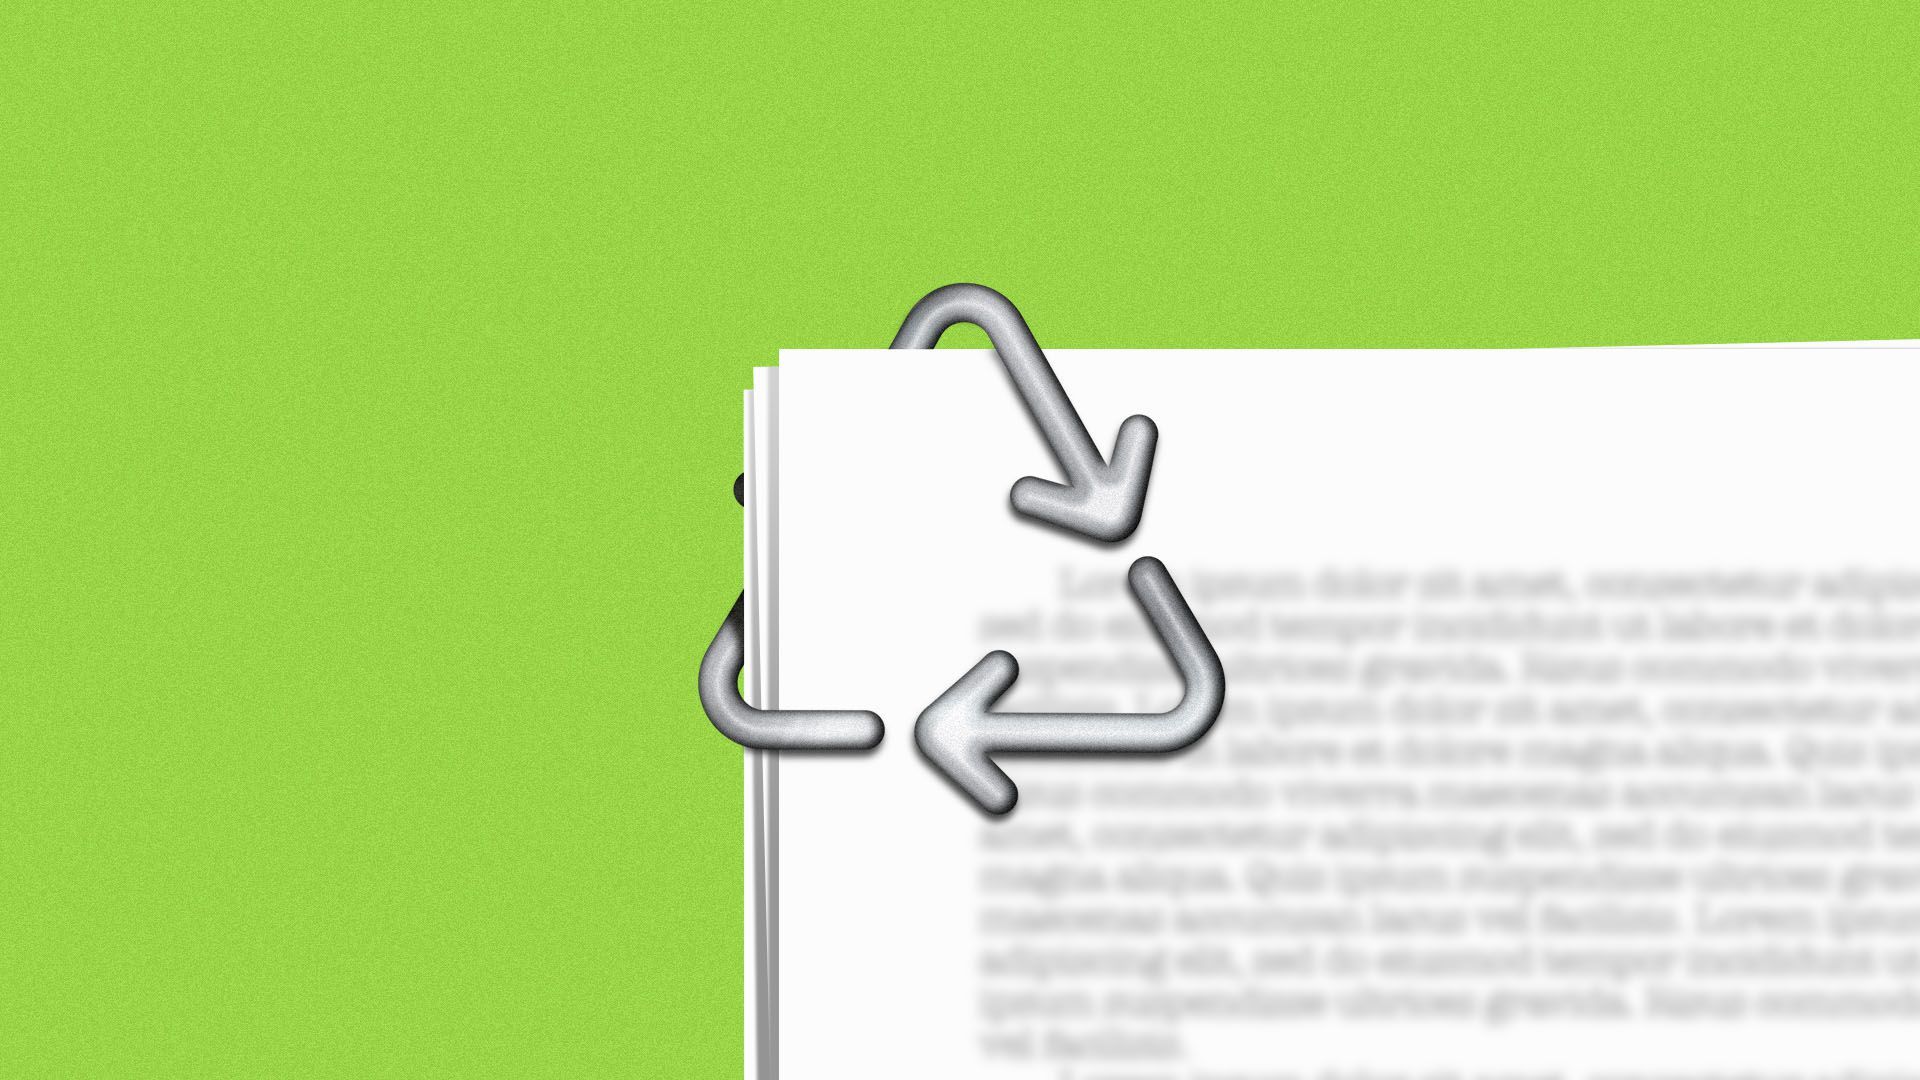 Illustration of a sheaf of papers with a recycle-sign shaped paper clip